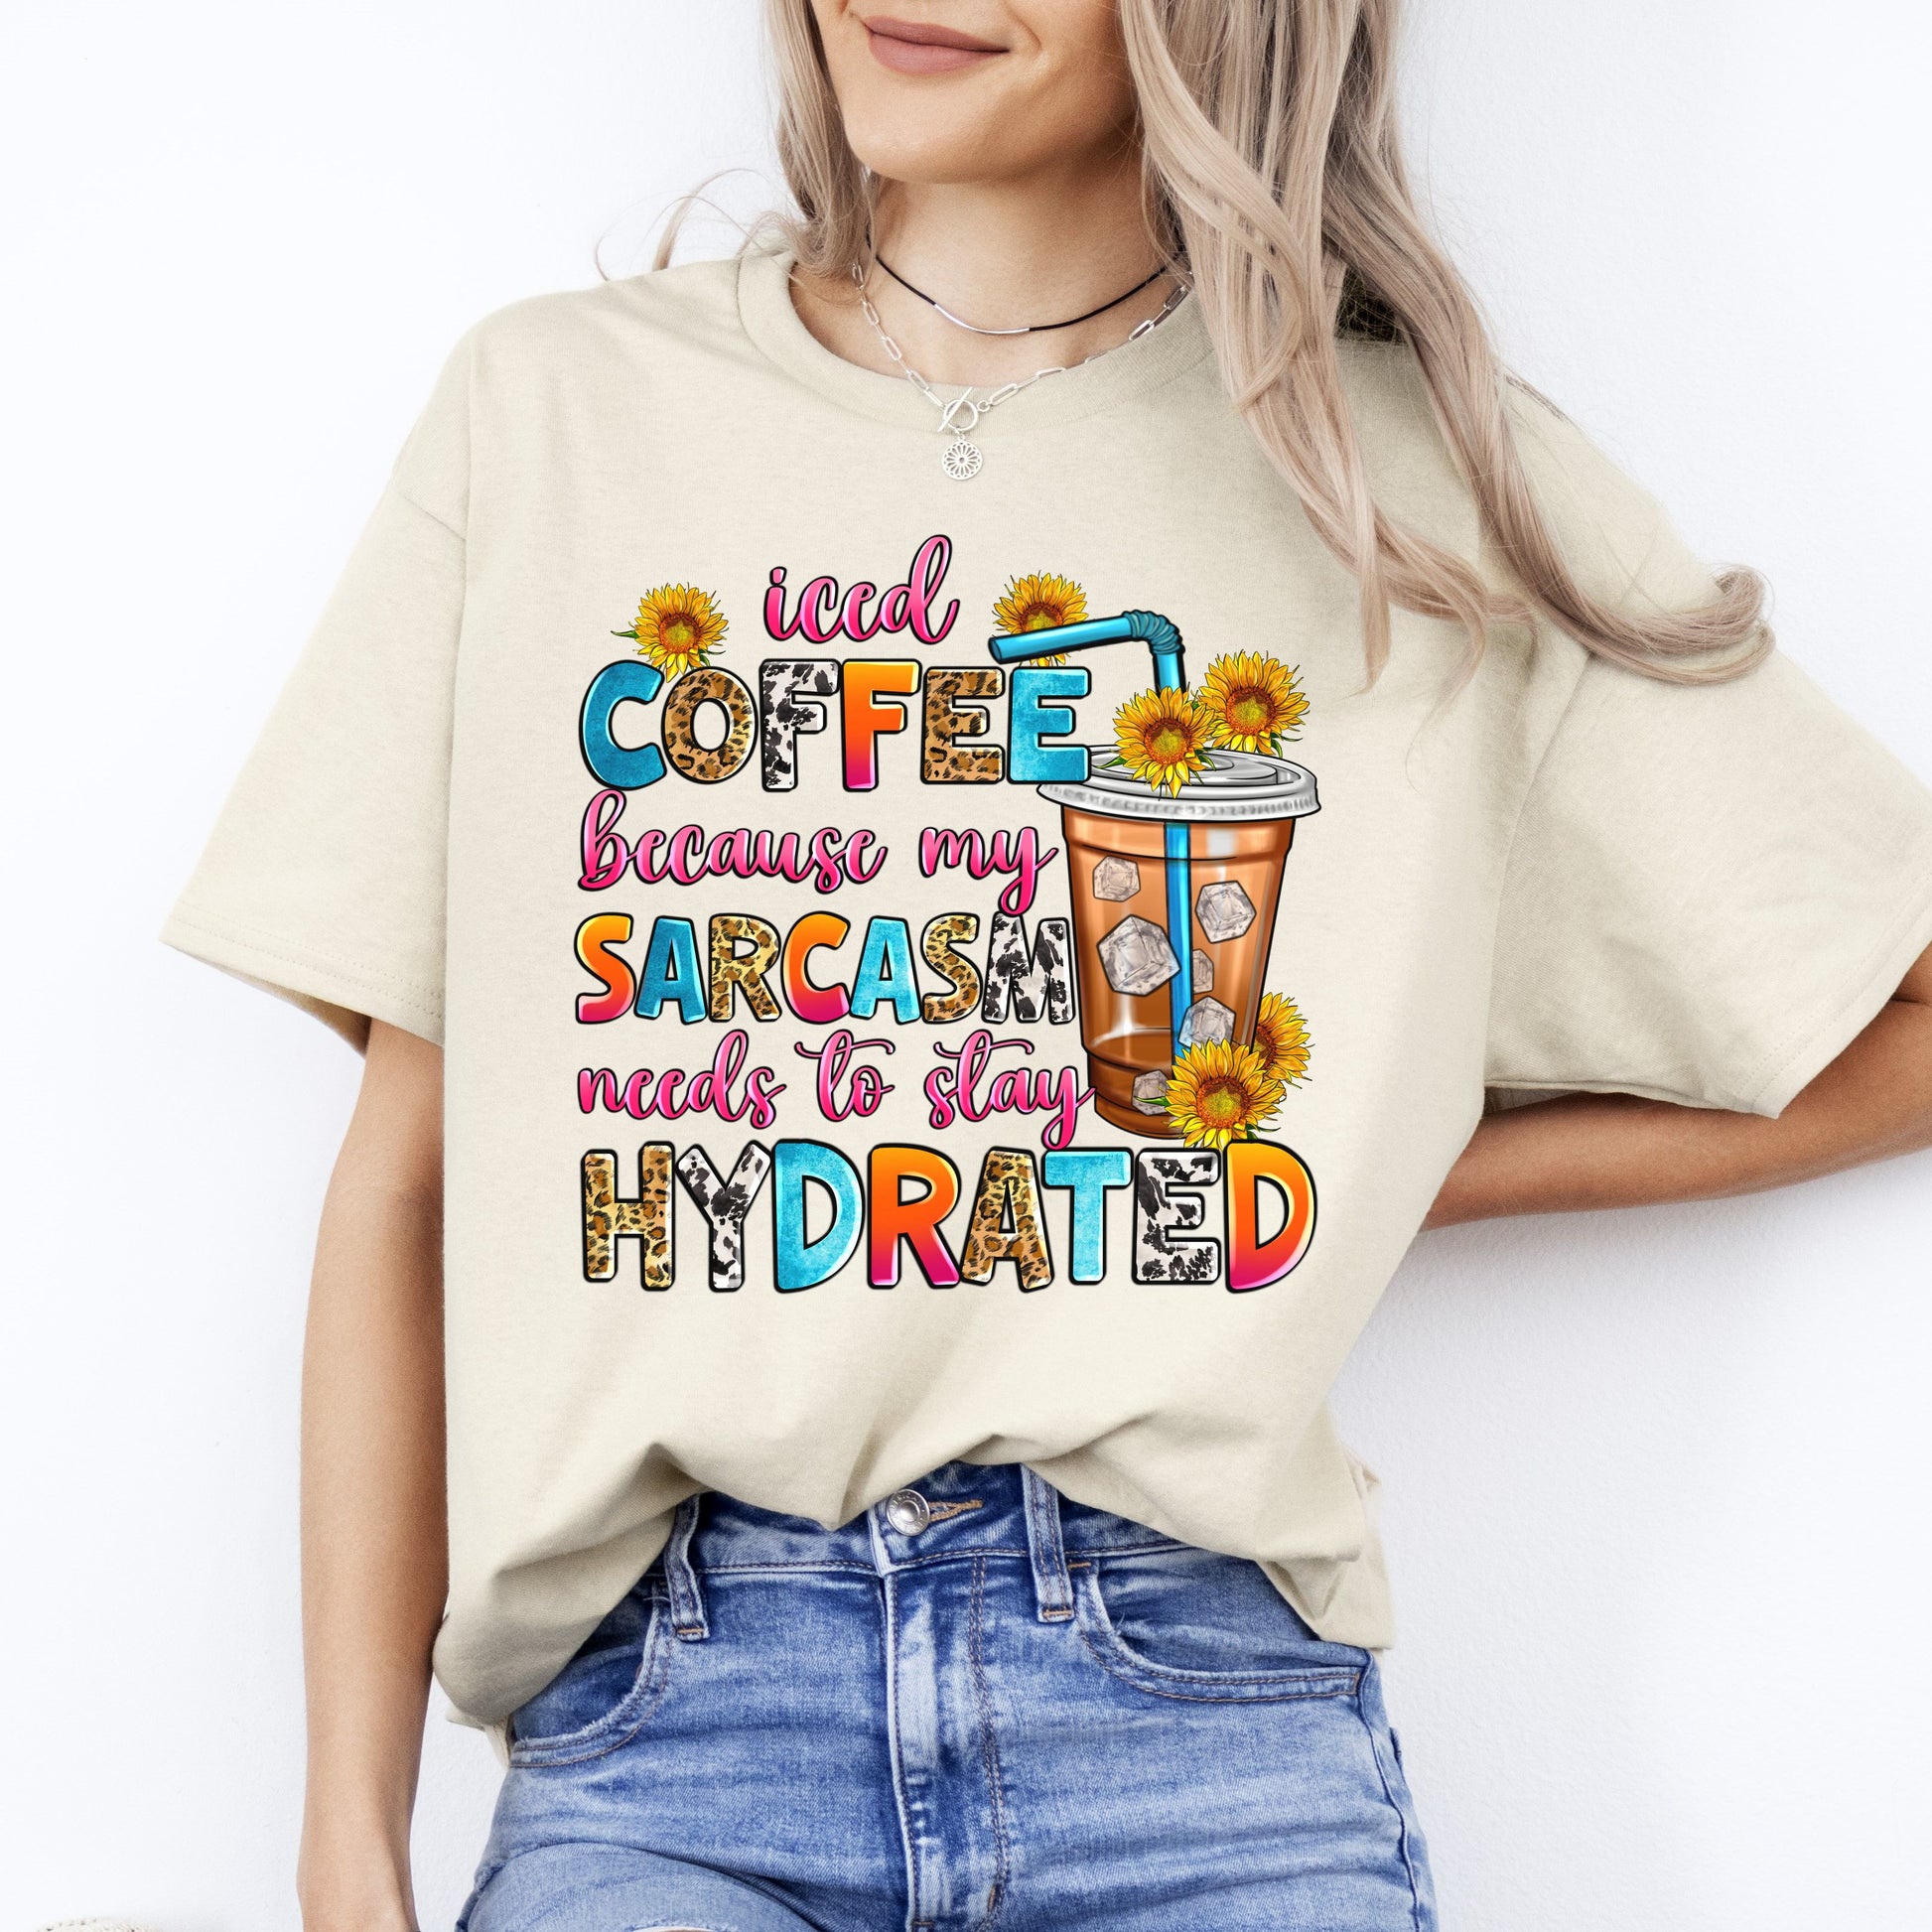 Iced coffee because my sarcasm needs to stay hydrated T-Shirt sarcastic Unisex Tee Sand White Sport Grey-Sand-Family-Gift-Planet